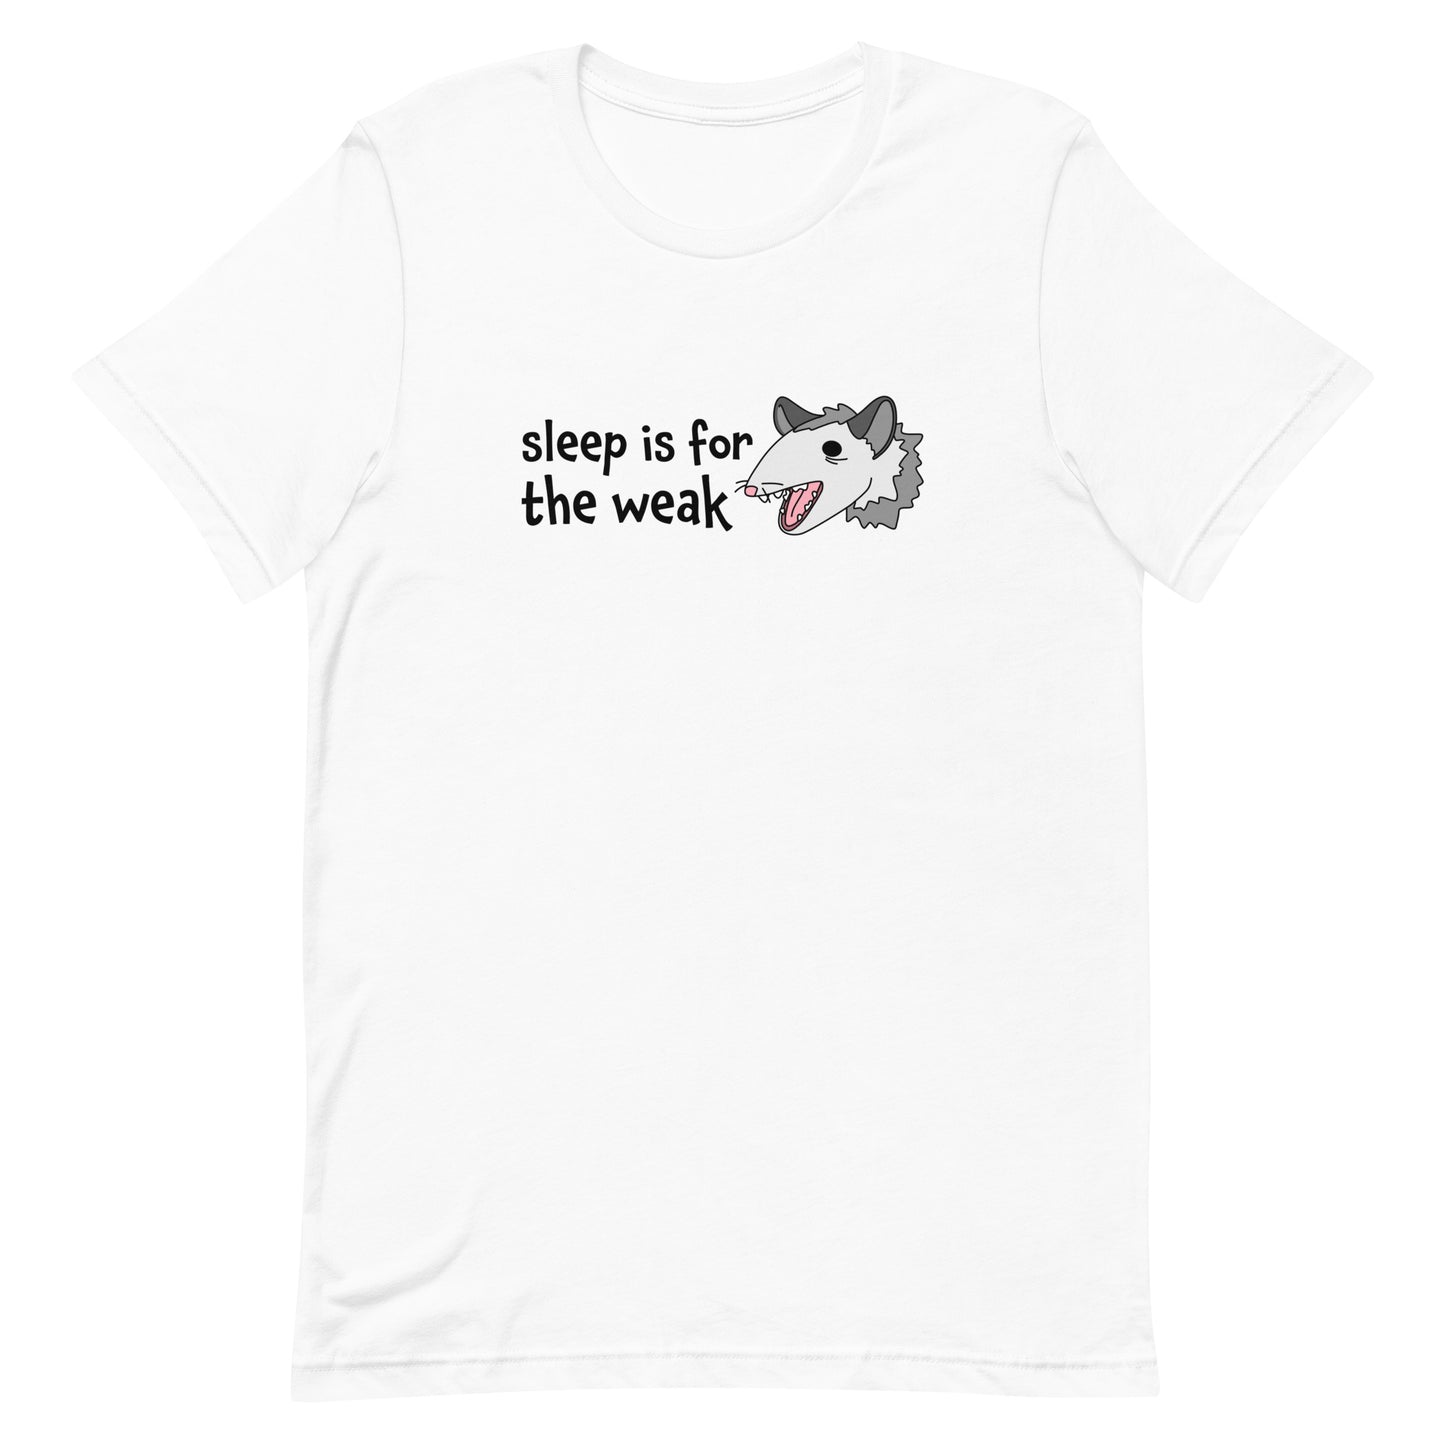 A white crewneck t-shirt featuring an illustration of an opossum with its mouth open, as if it was yelling. Text alongside the opossum reads "sleep is for the weak"